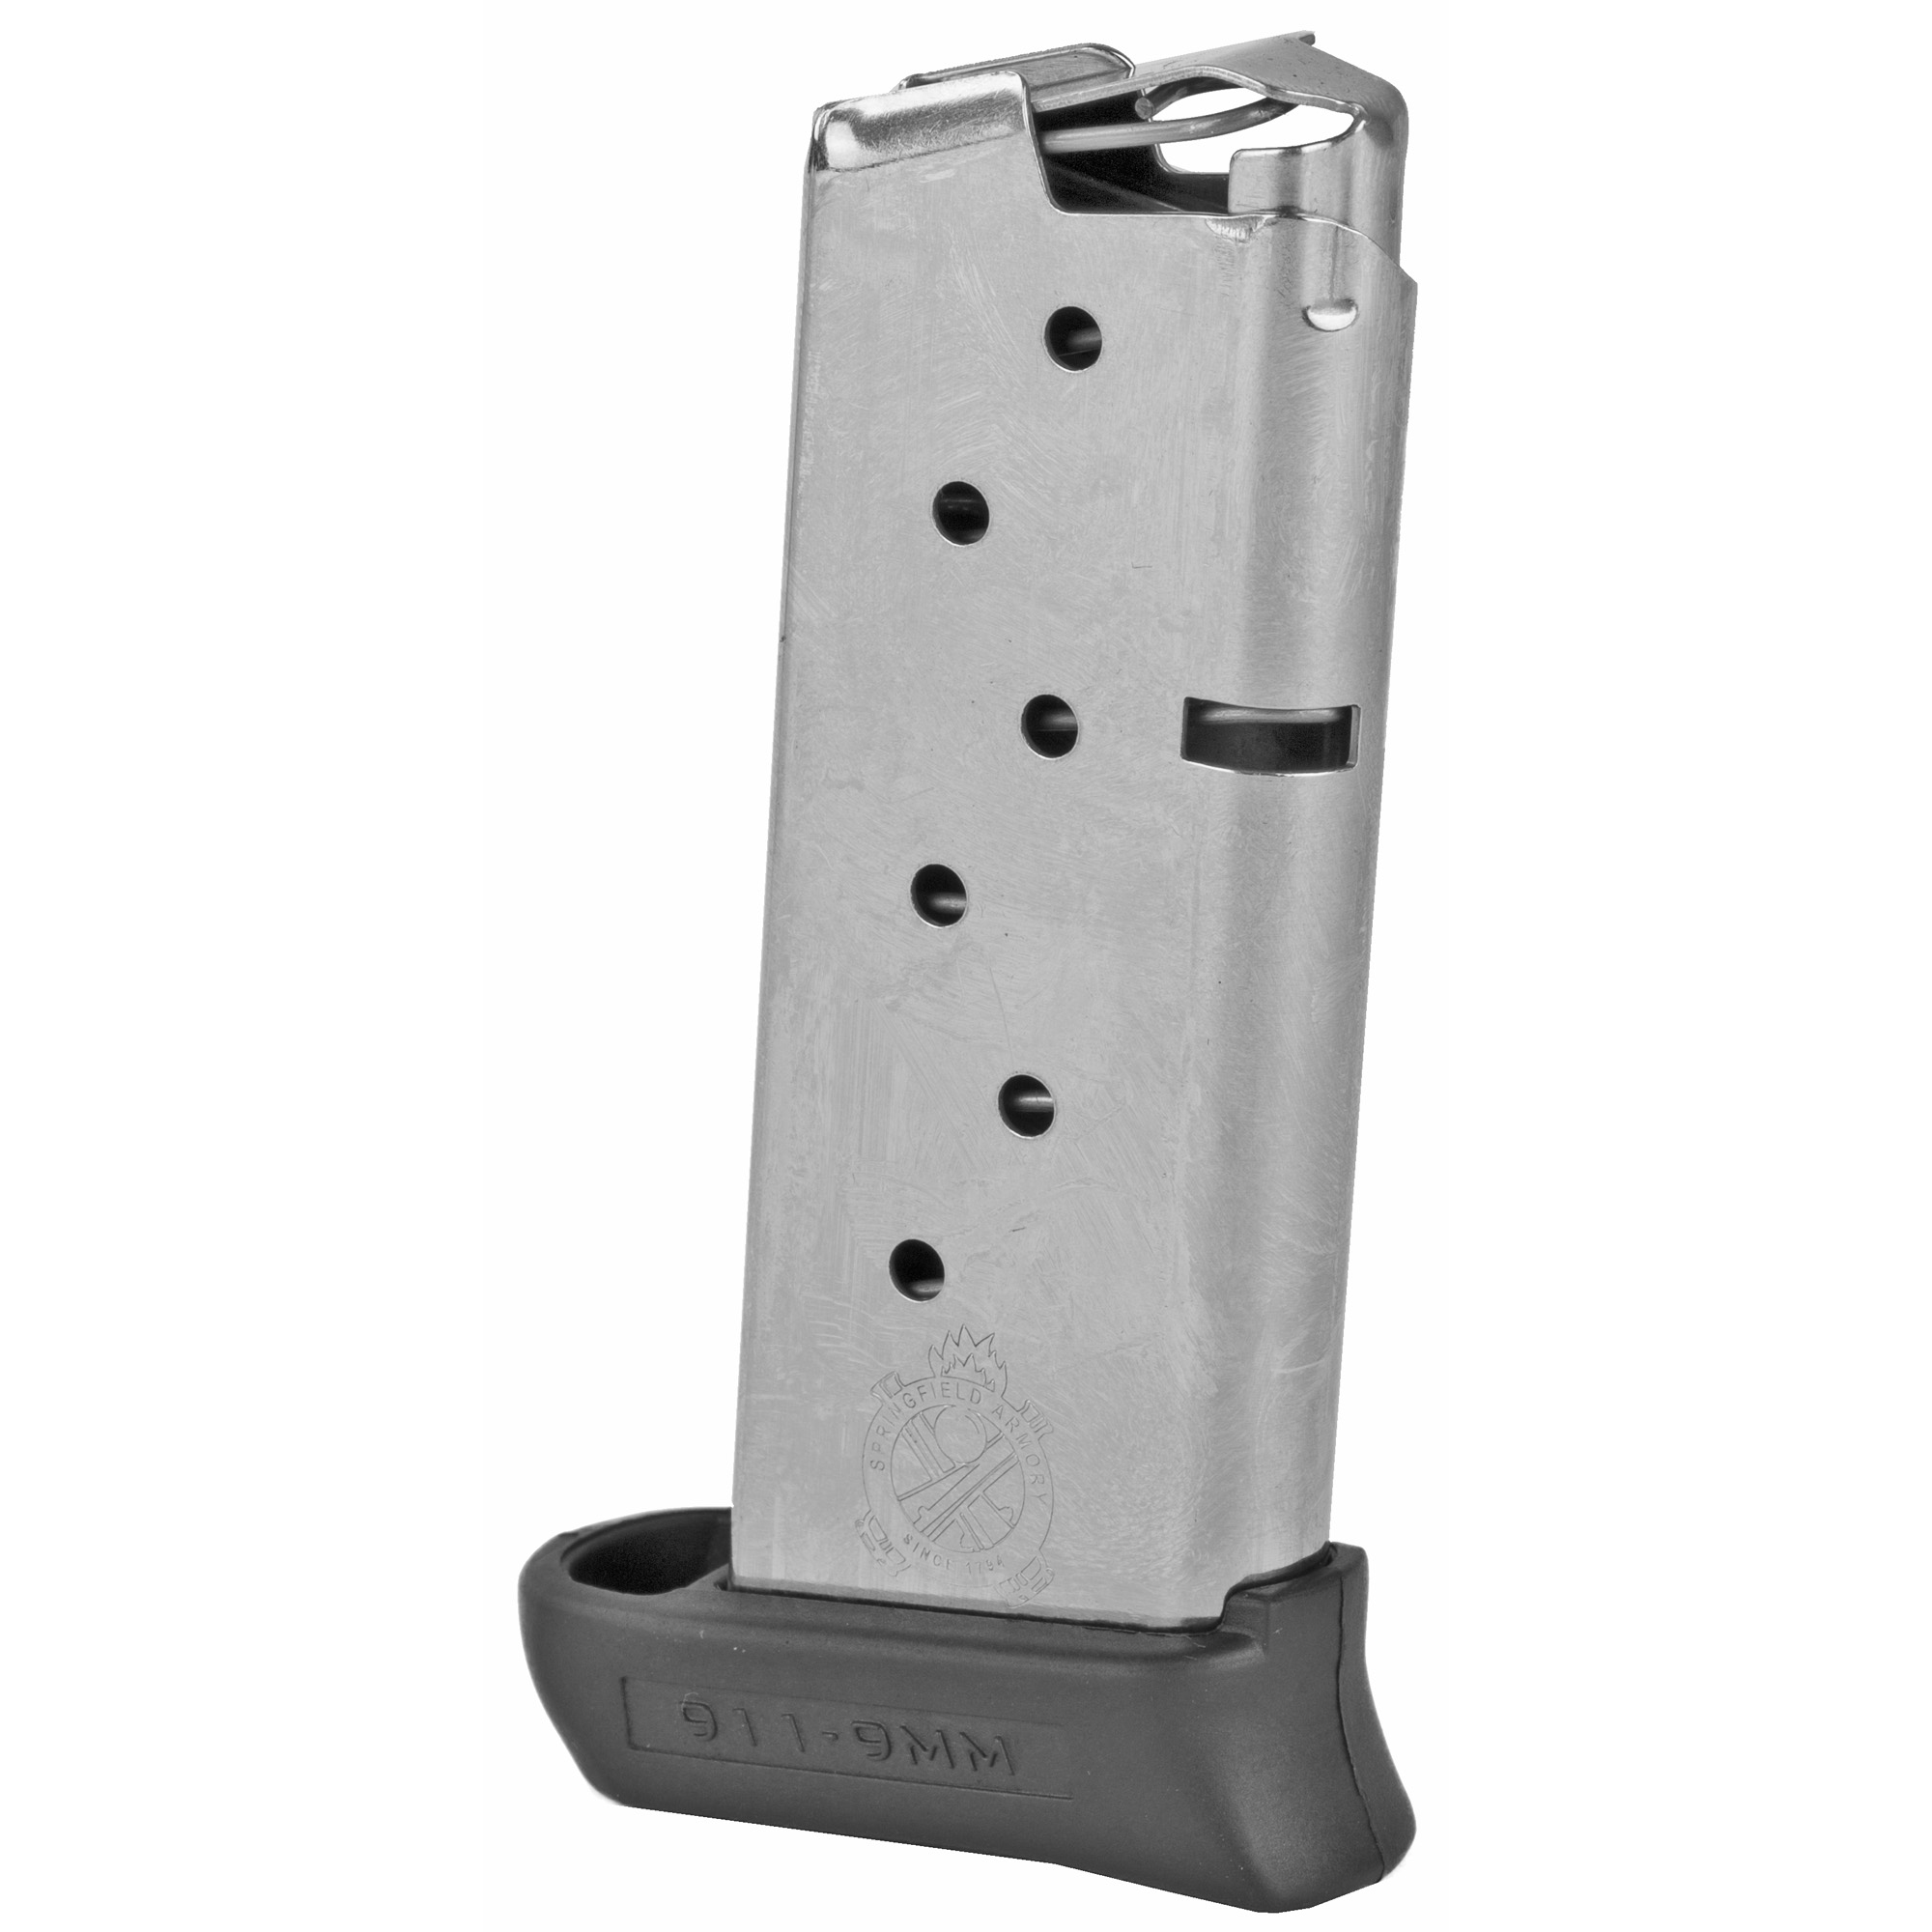 springfield 911 9mm stainless